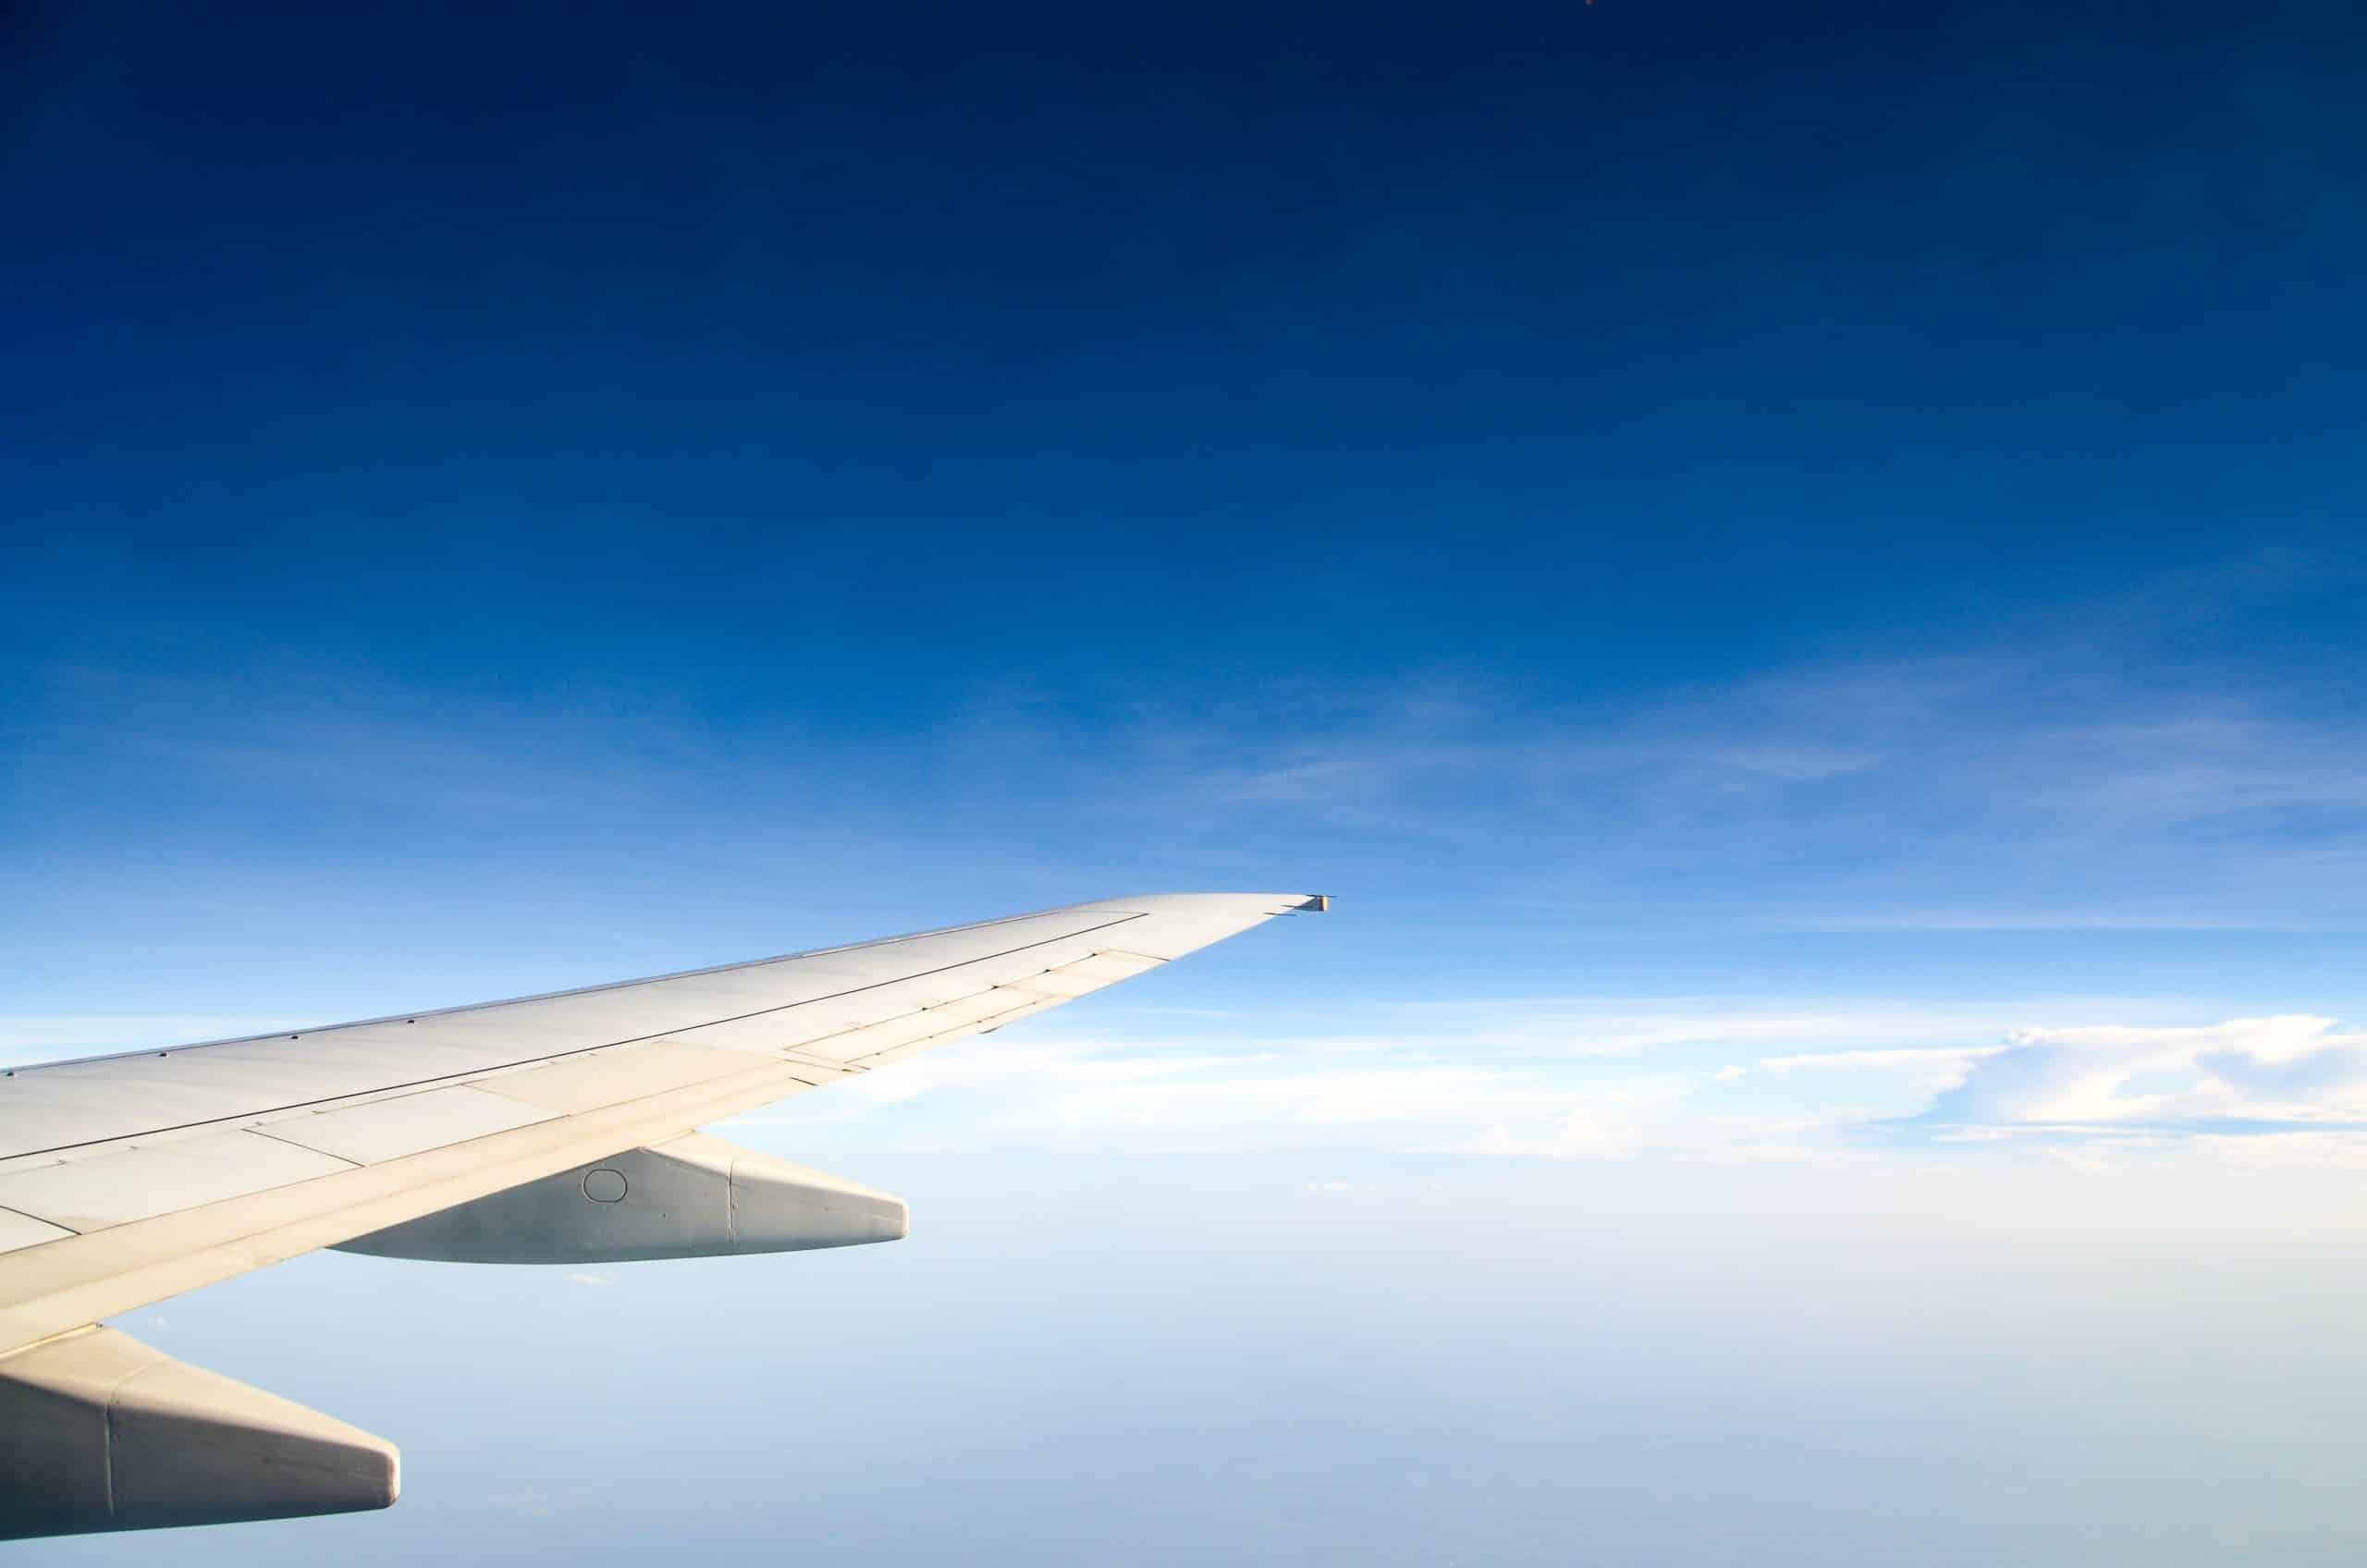 airplane wing viewed from window mid-flight